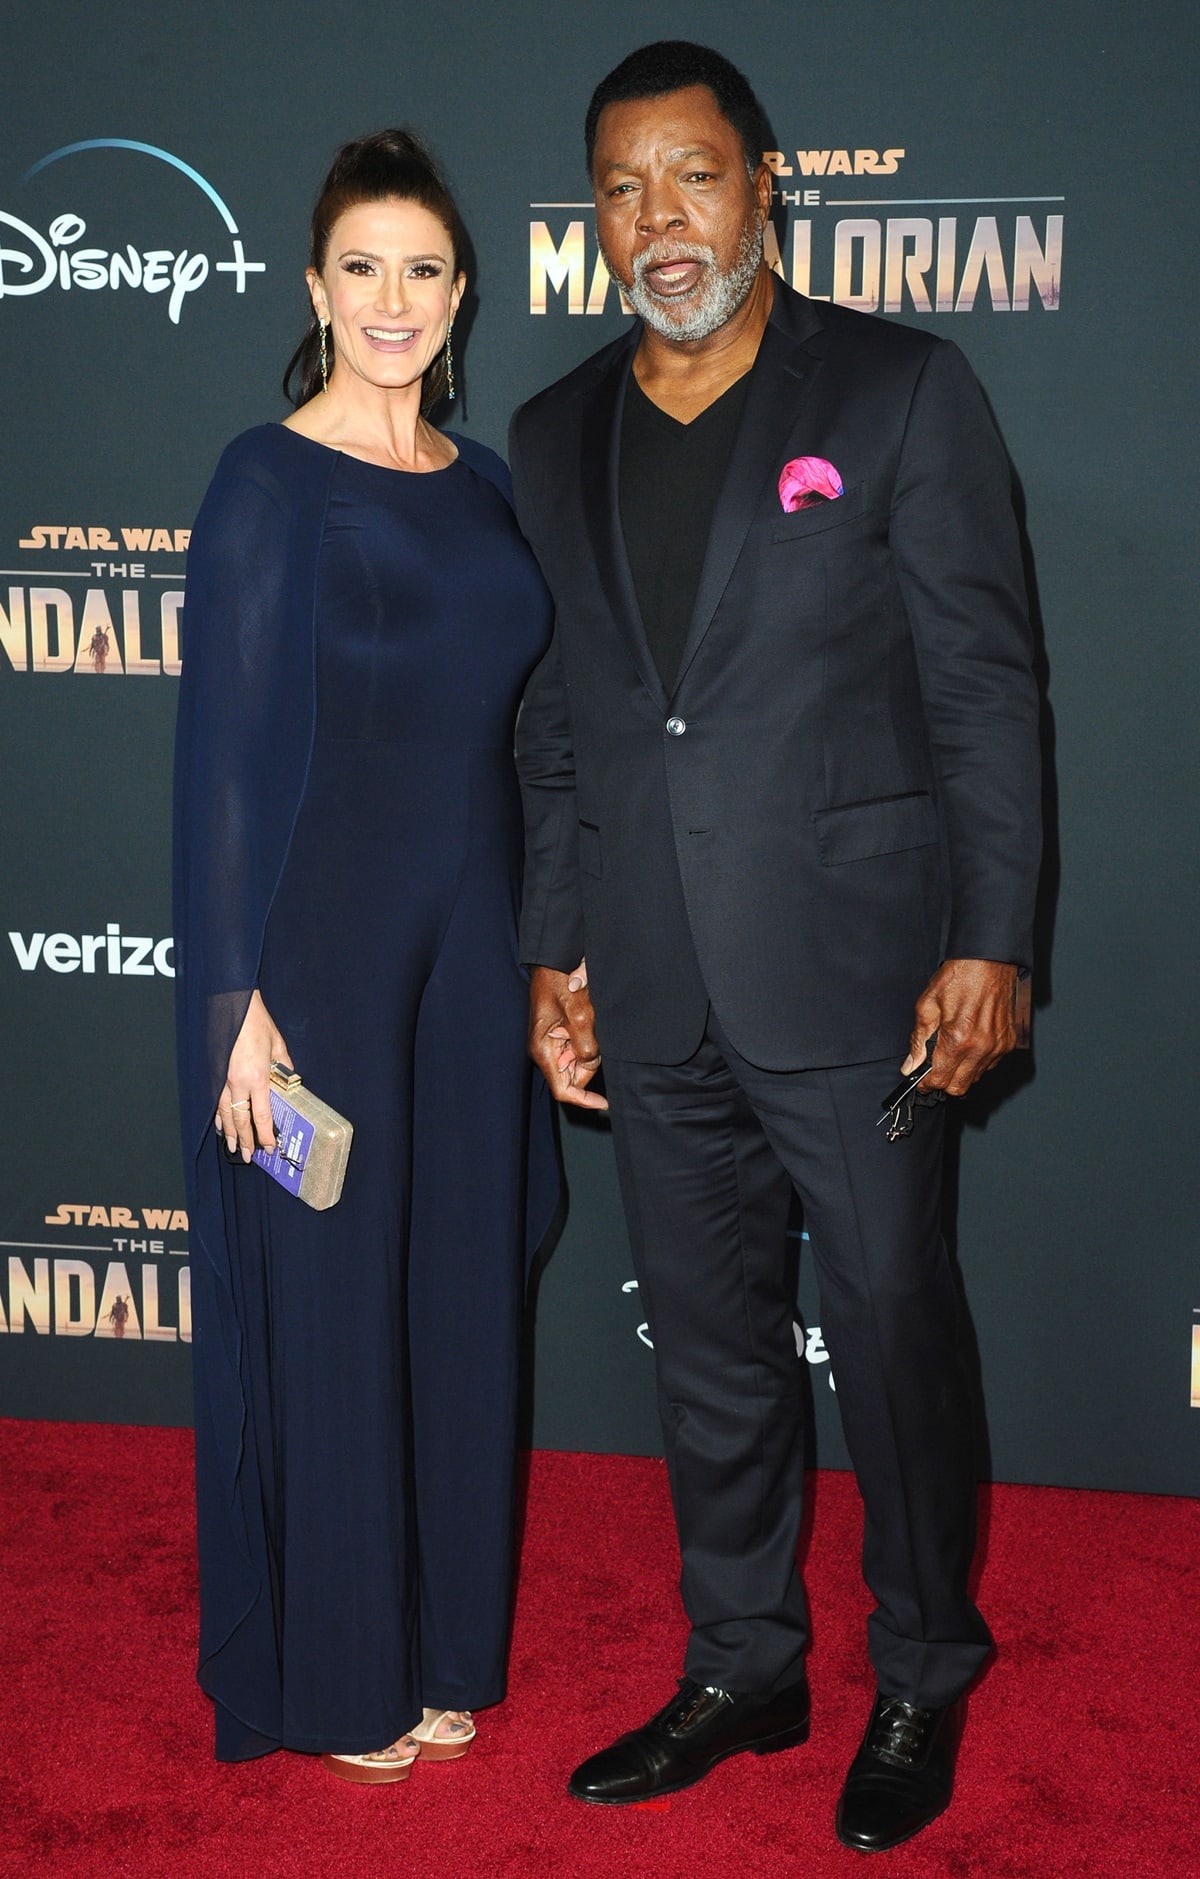 Carl Weathers with his girlfriend Christine Kludjian at the premiere of Disney+'s "The Mandalorian"